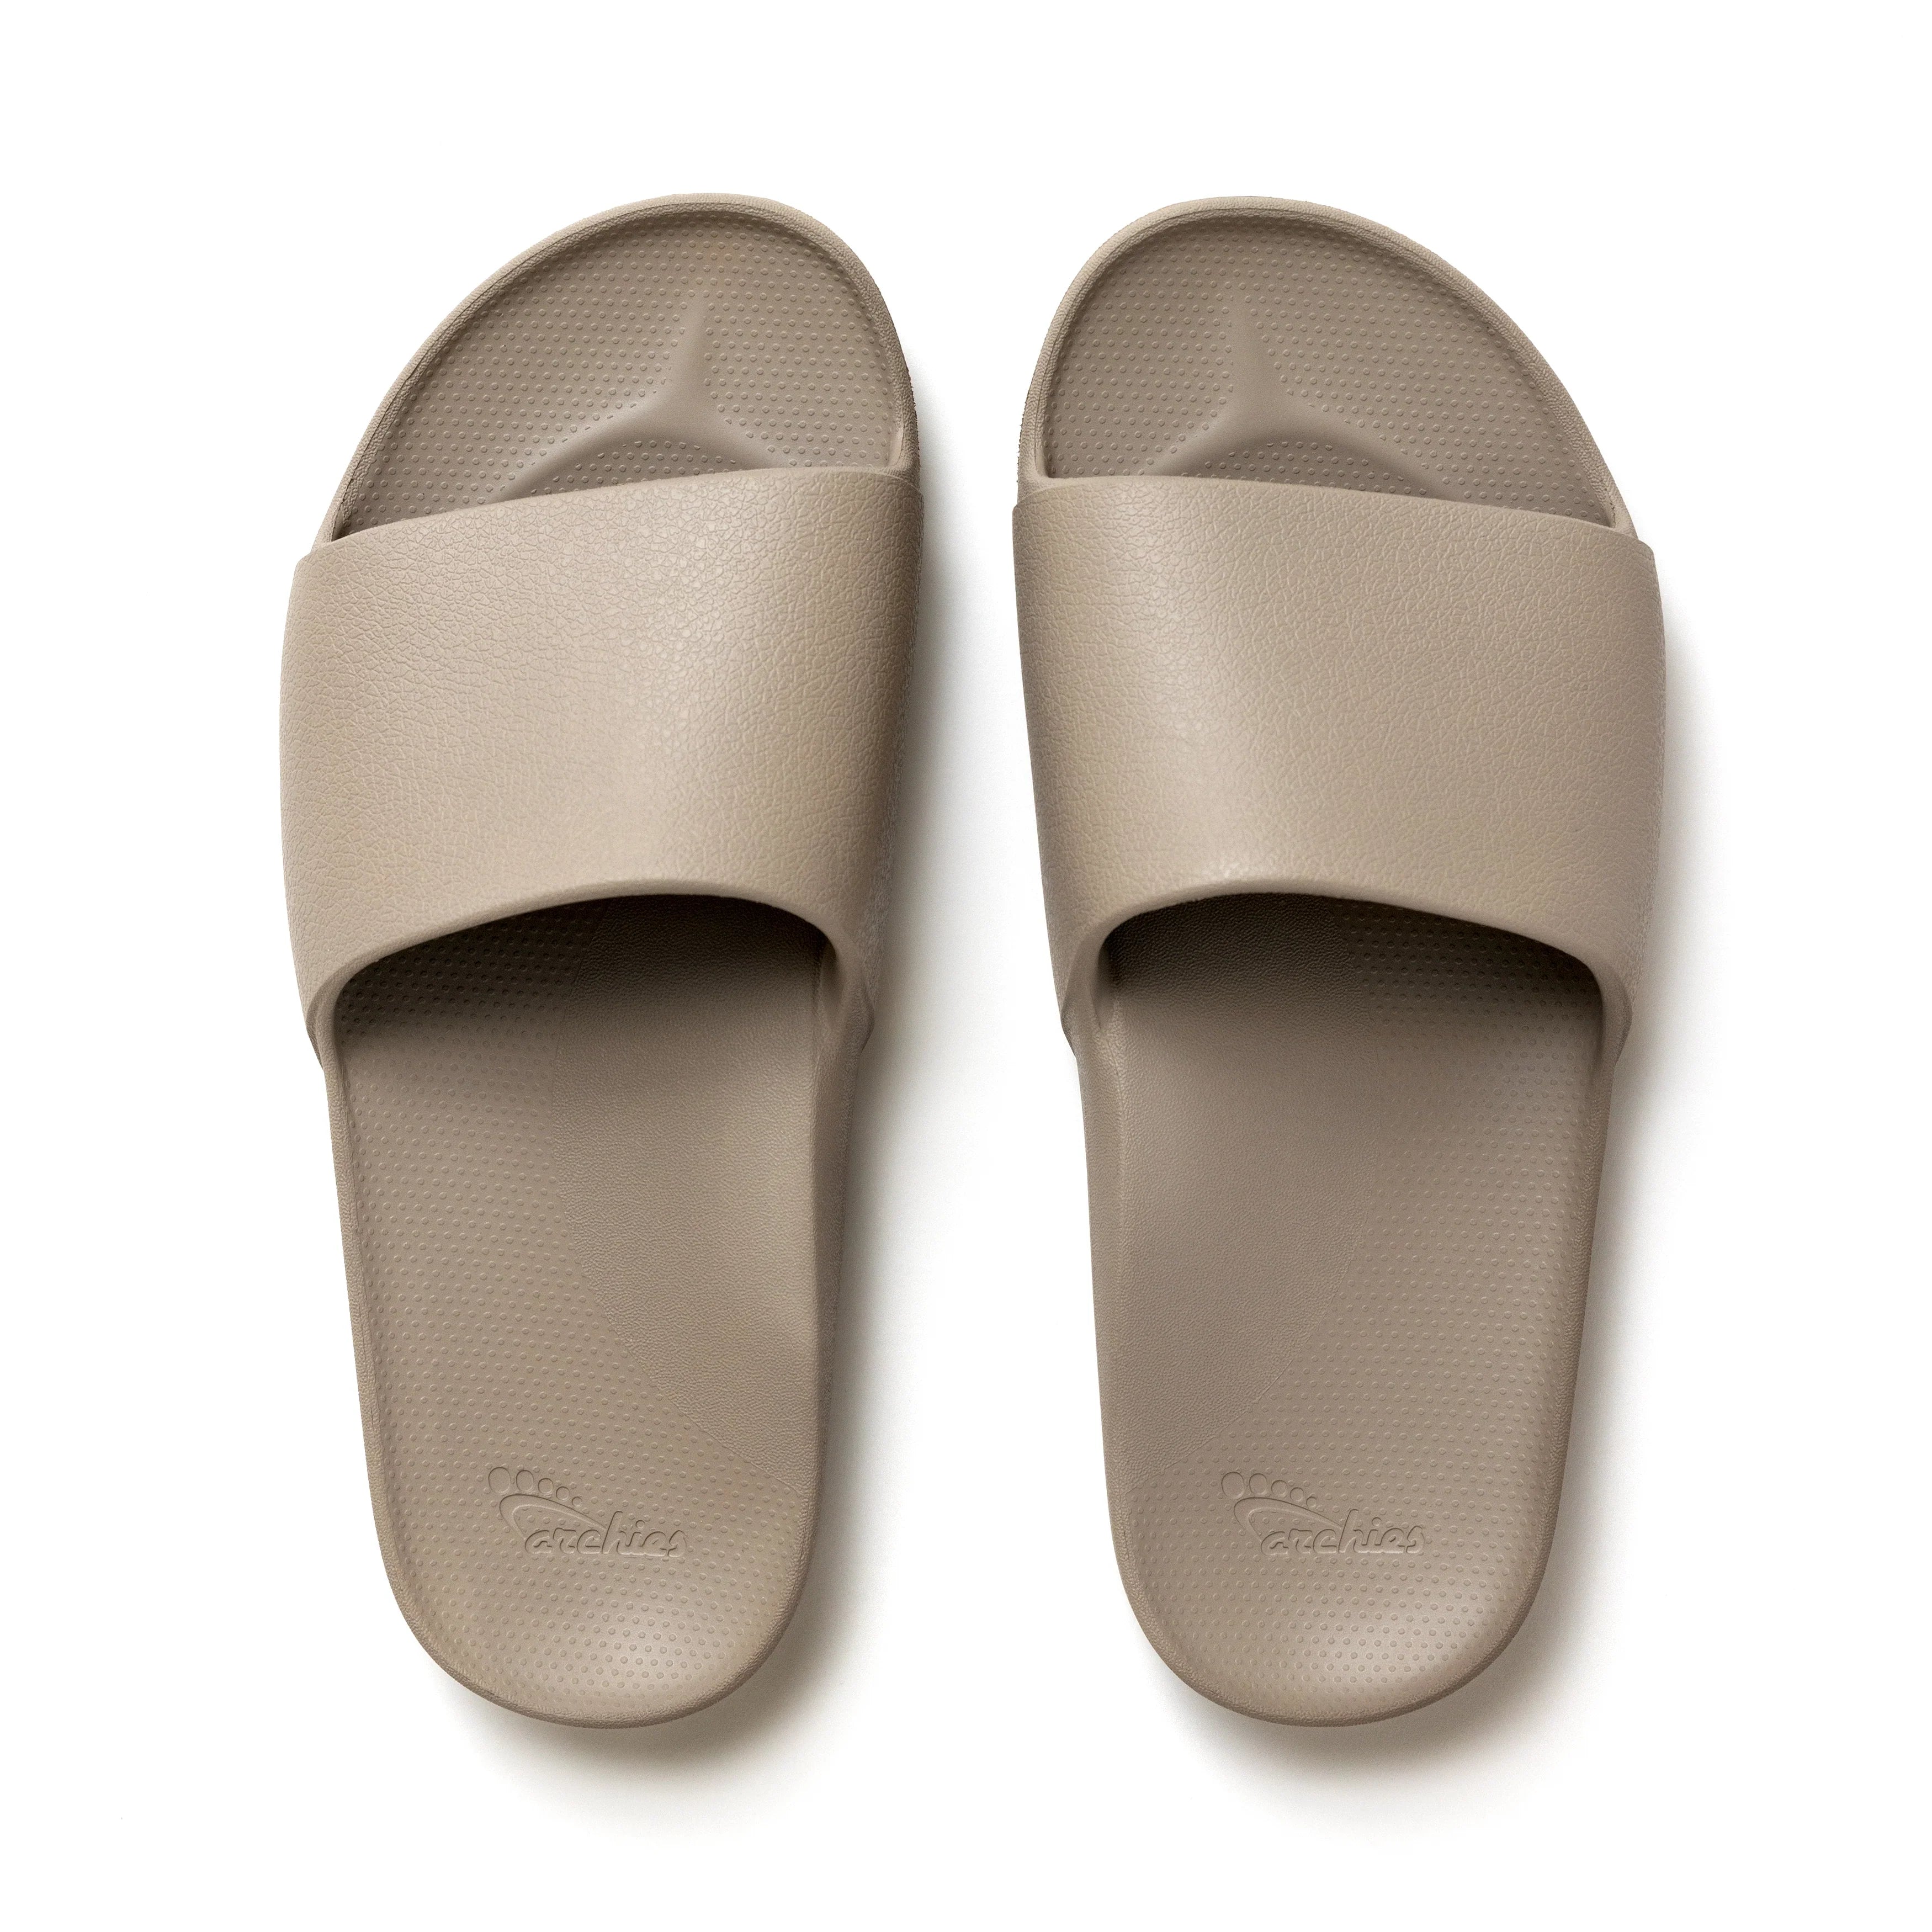 Archies Flip Flops Taupe